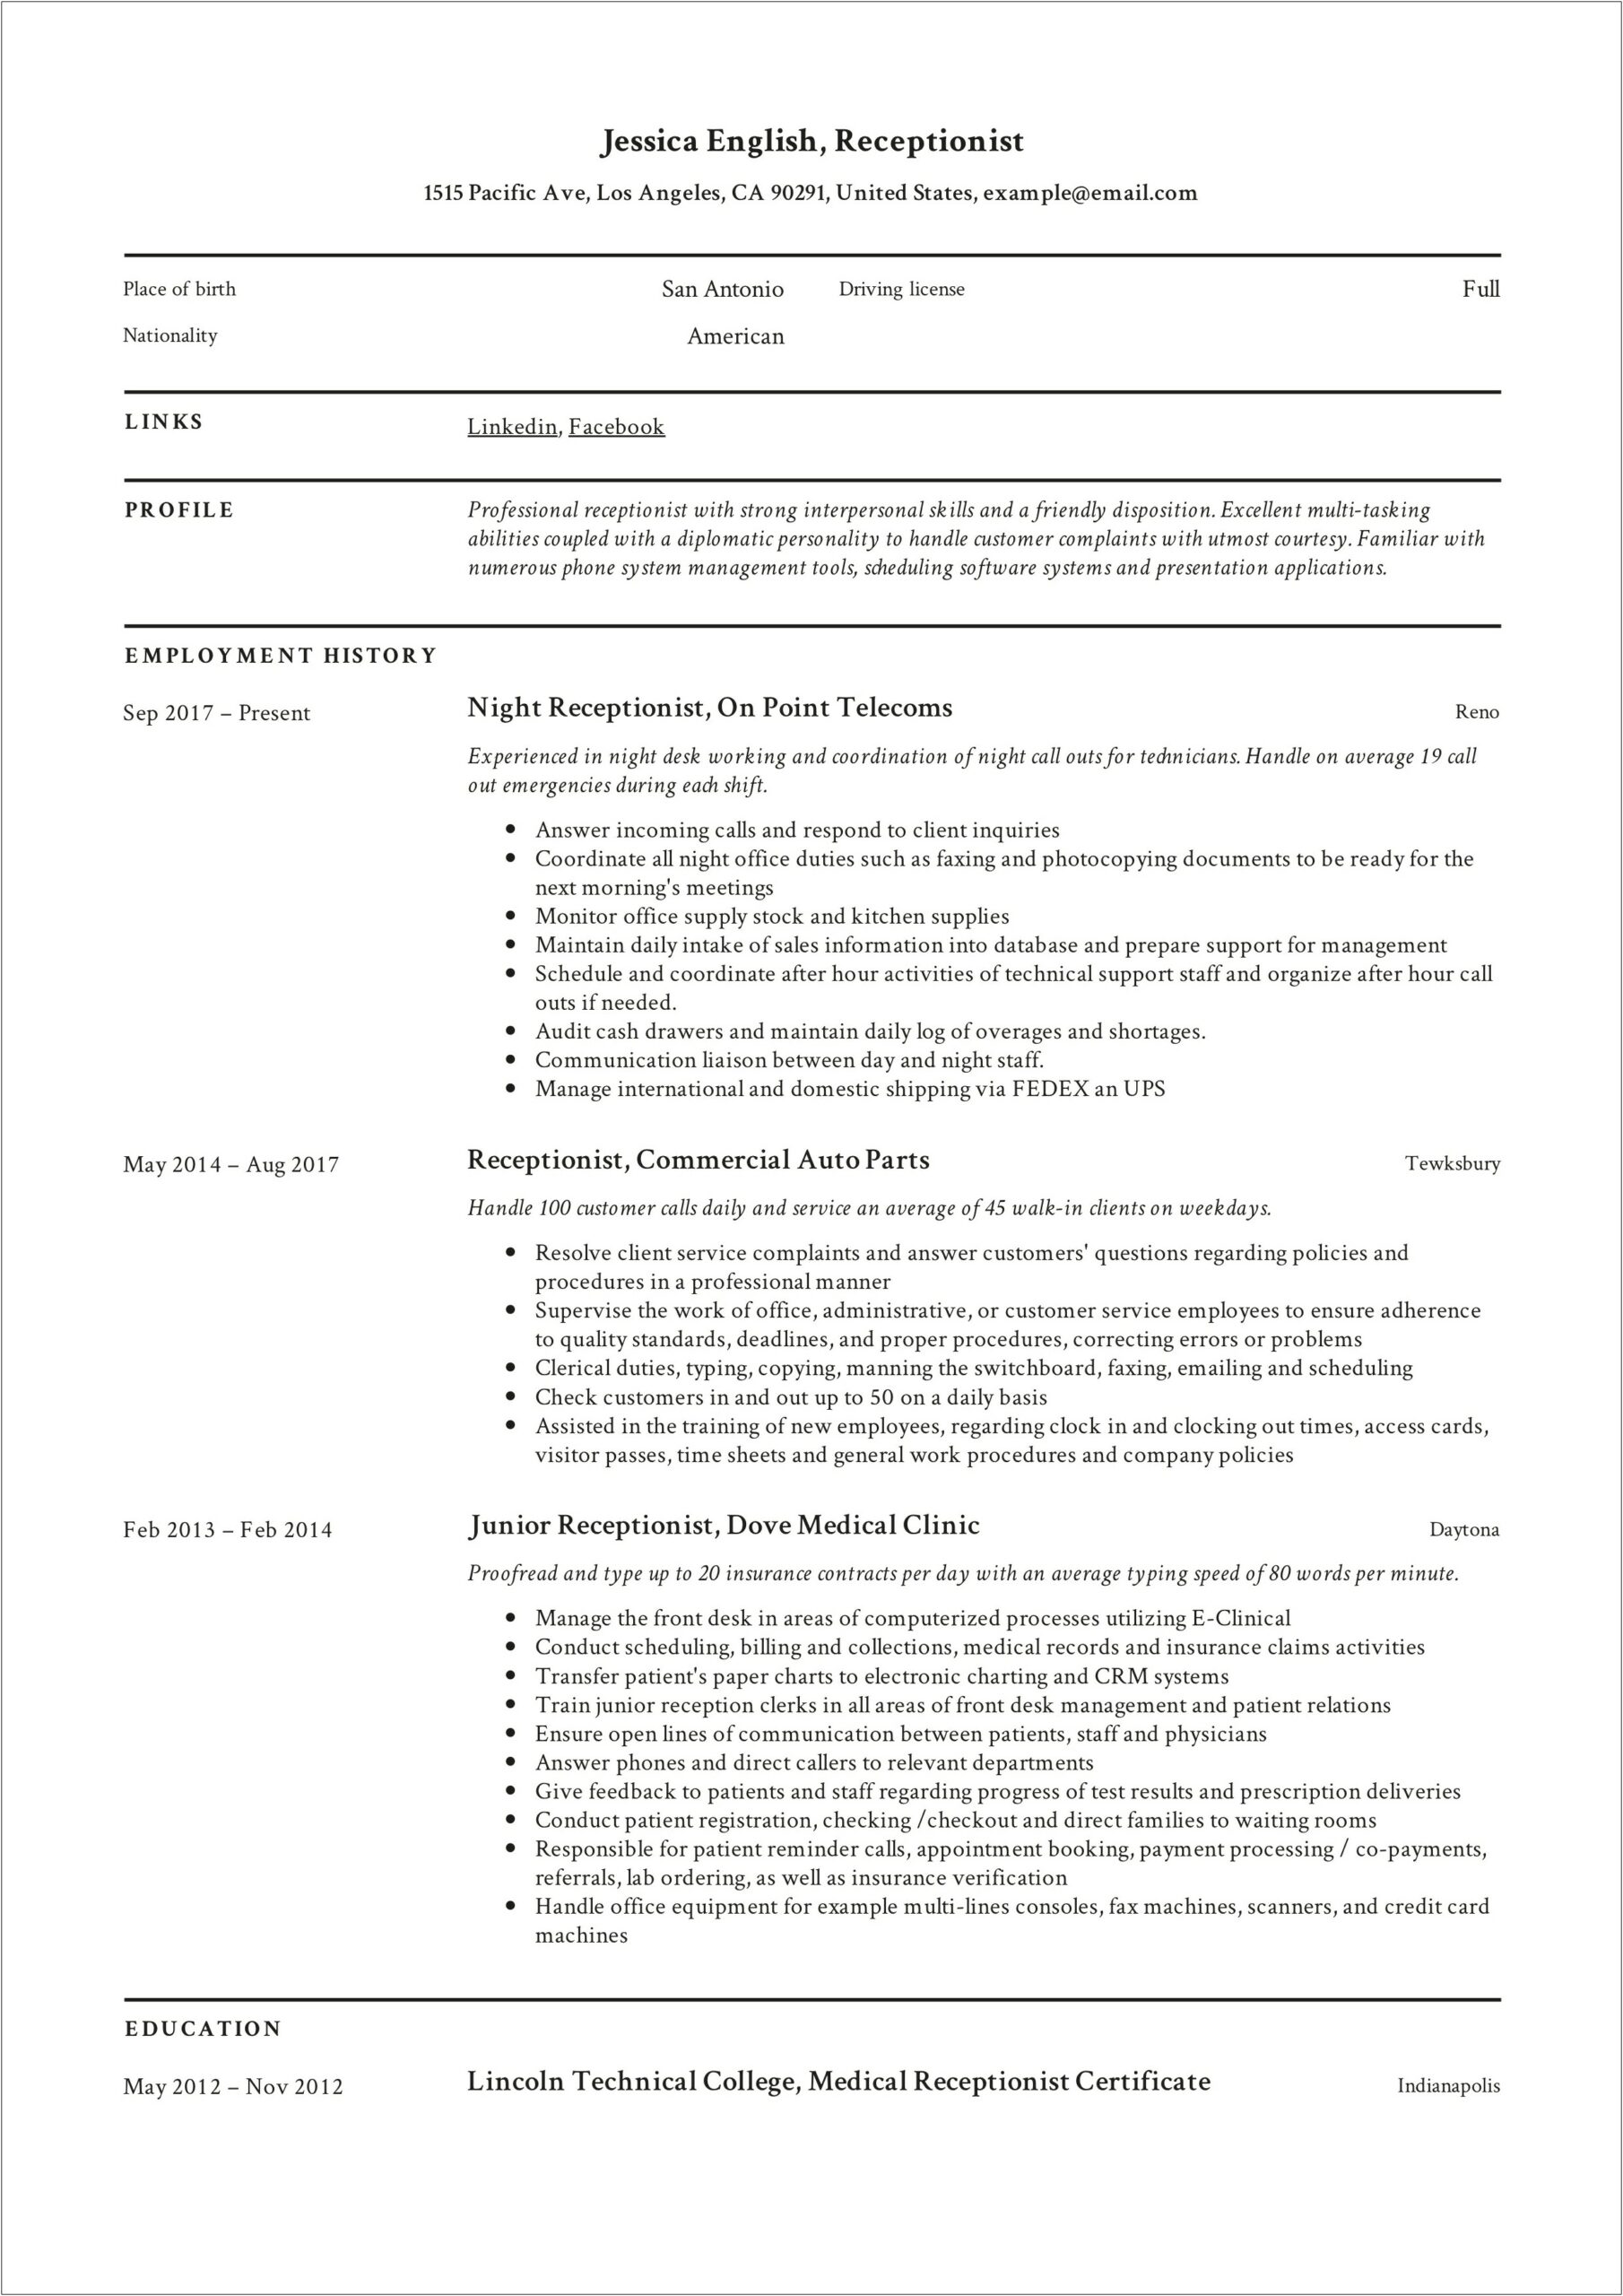 Sample Resume For Medical Receptionist With No Experience